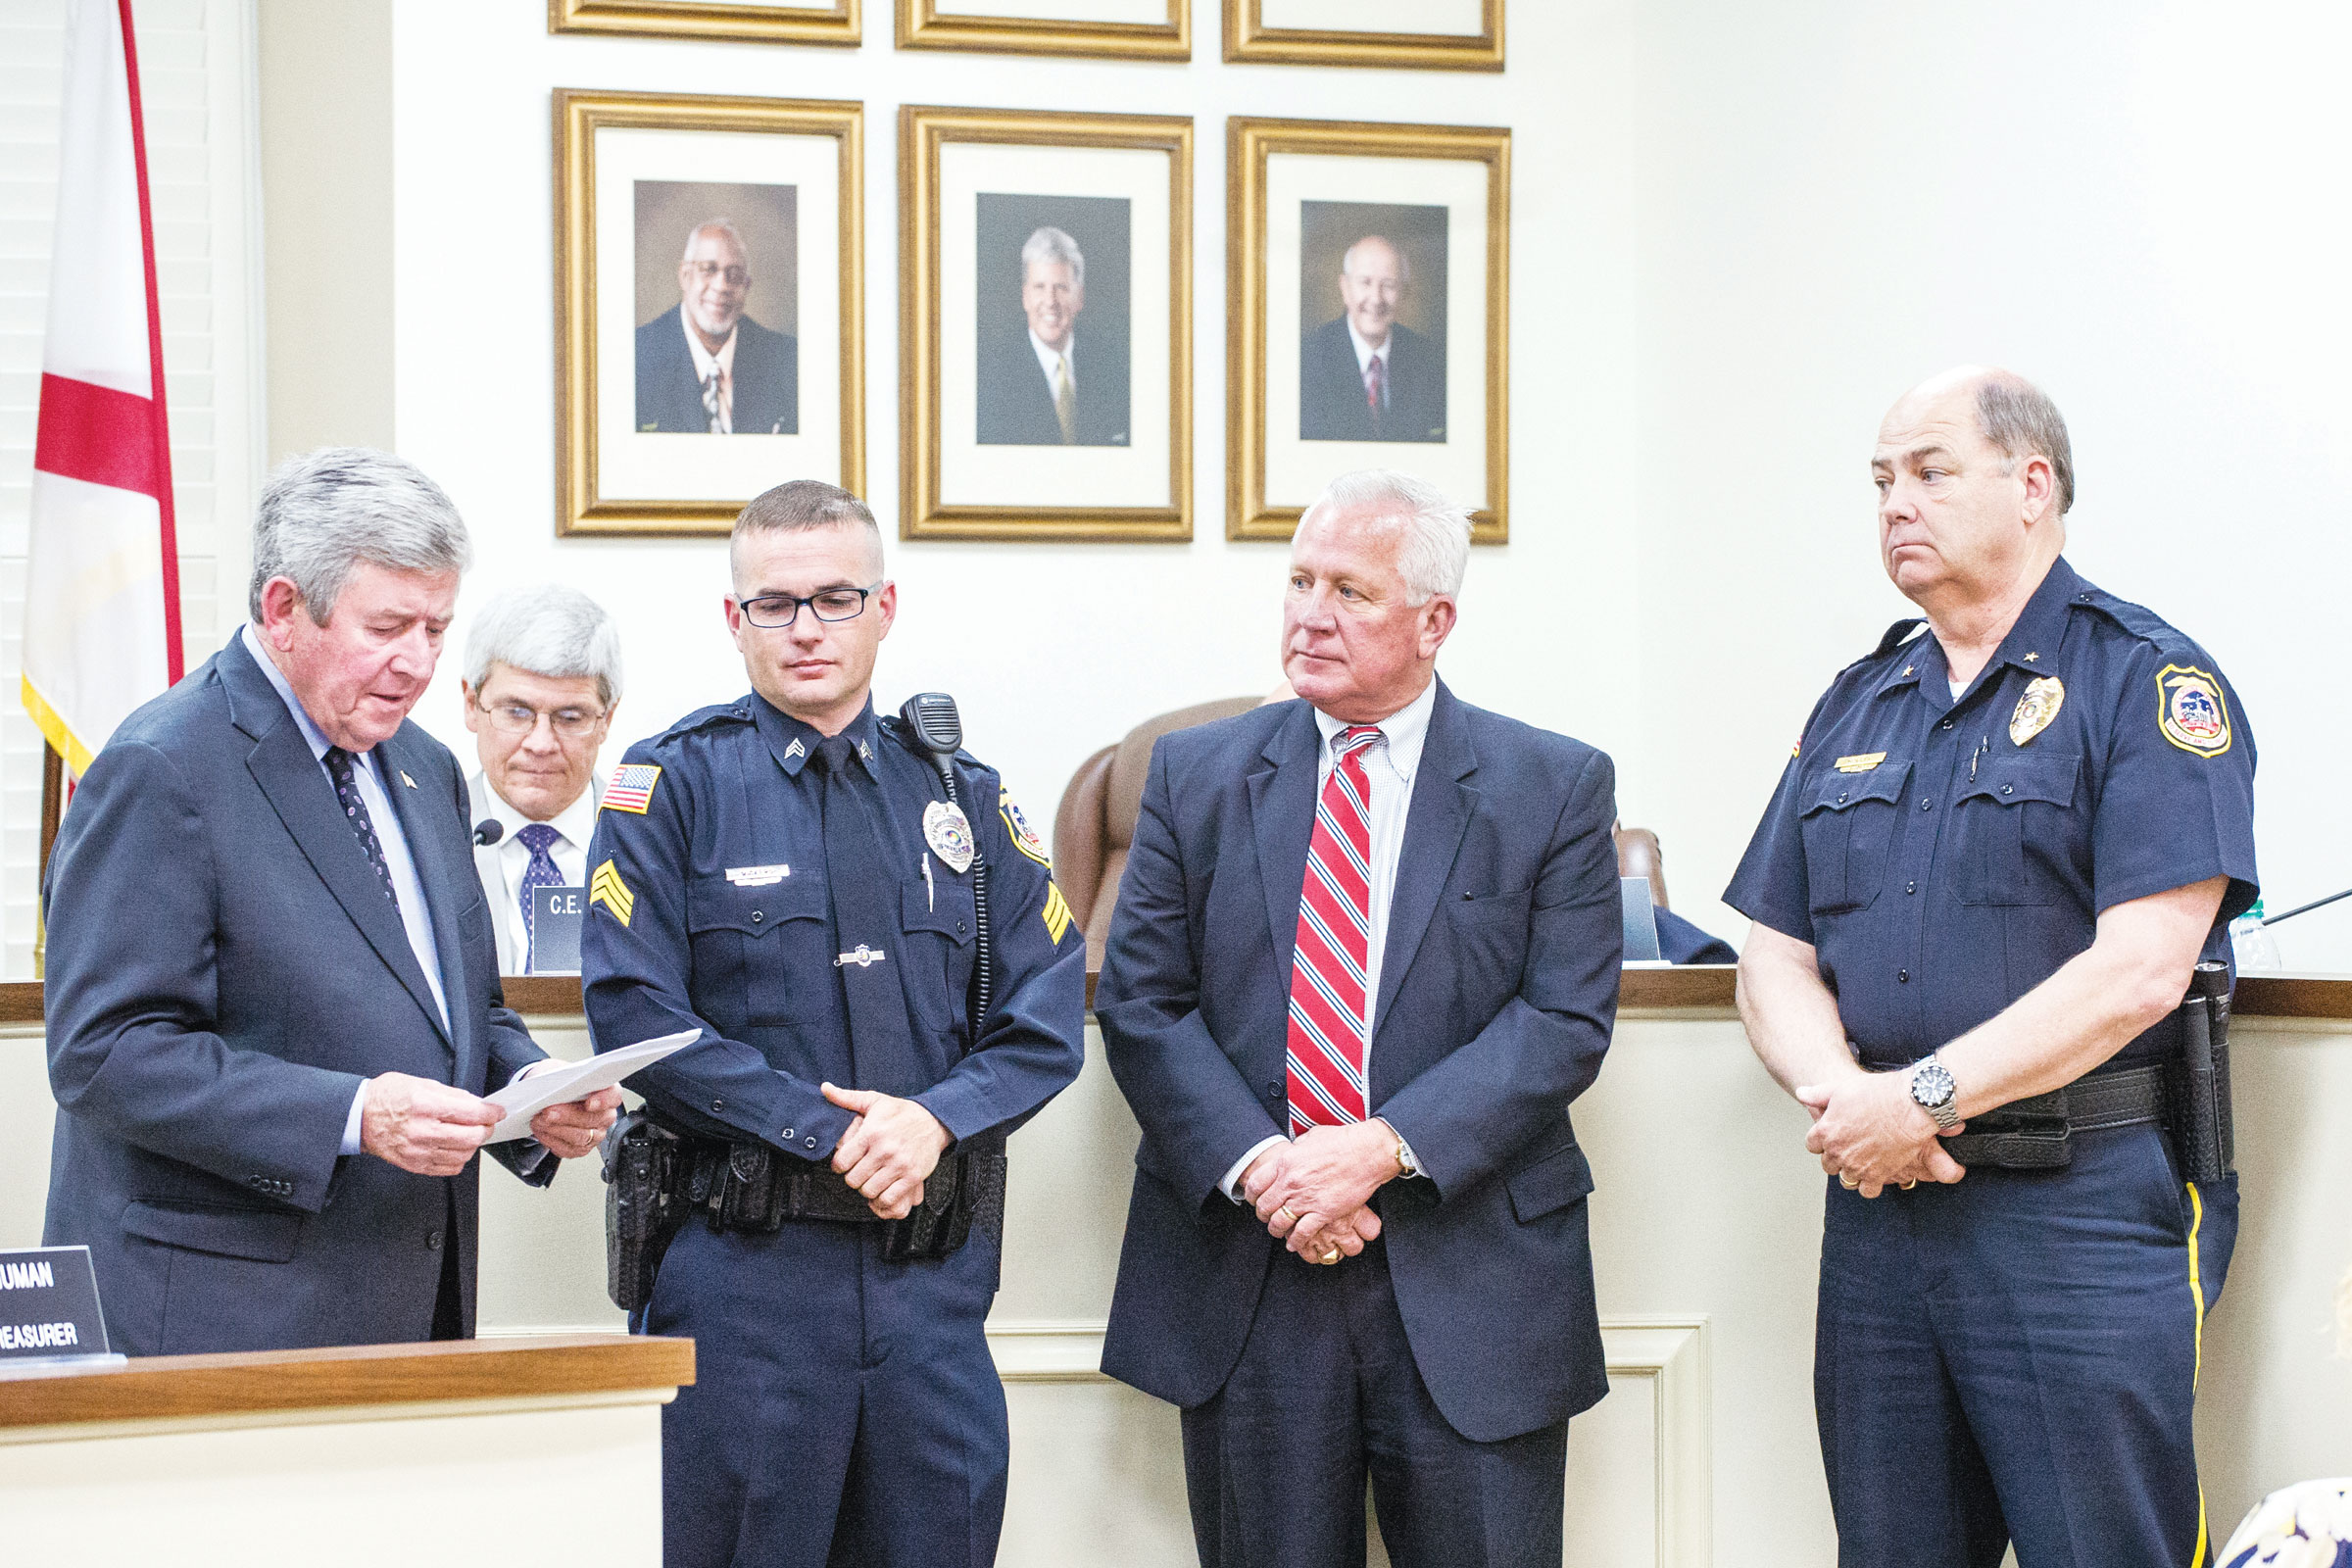 Vickers named Officer of the Year